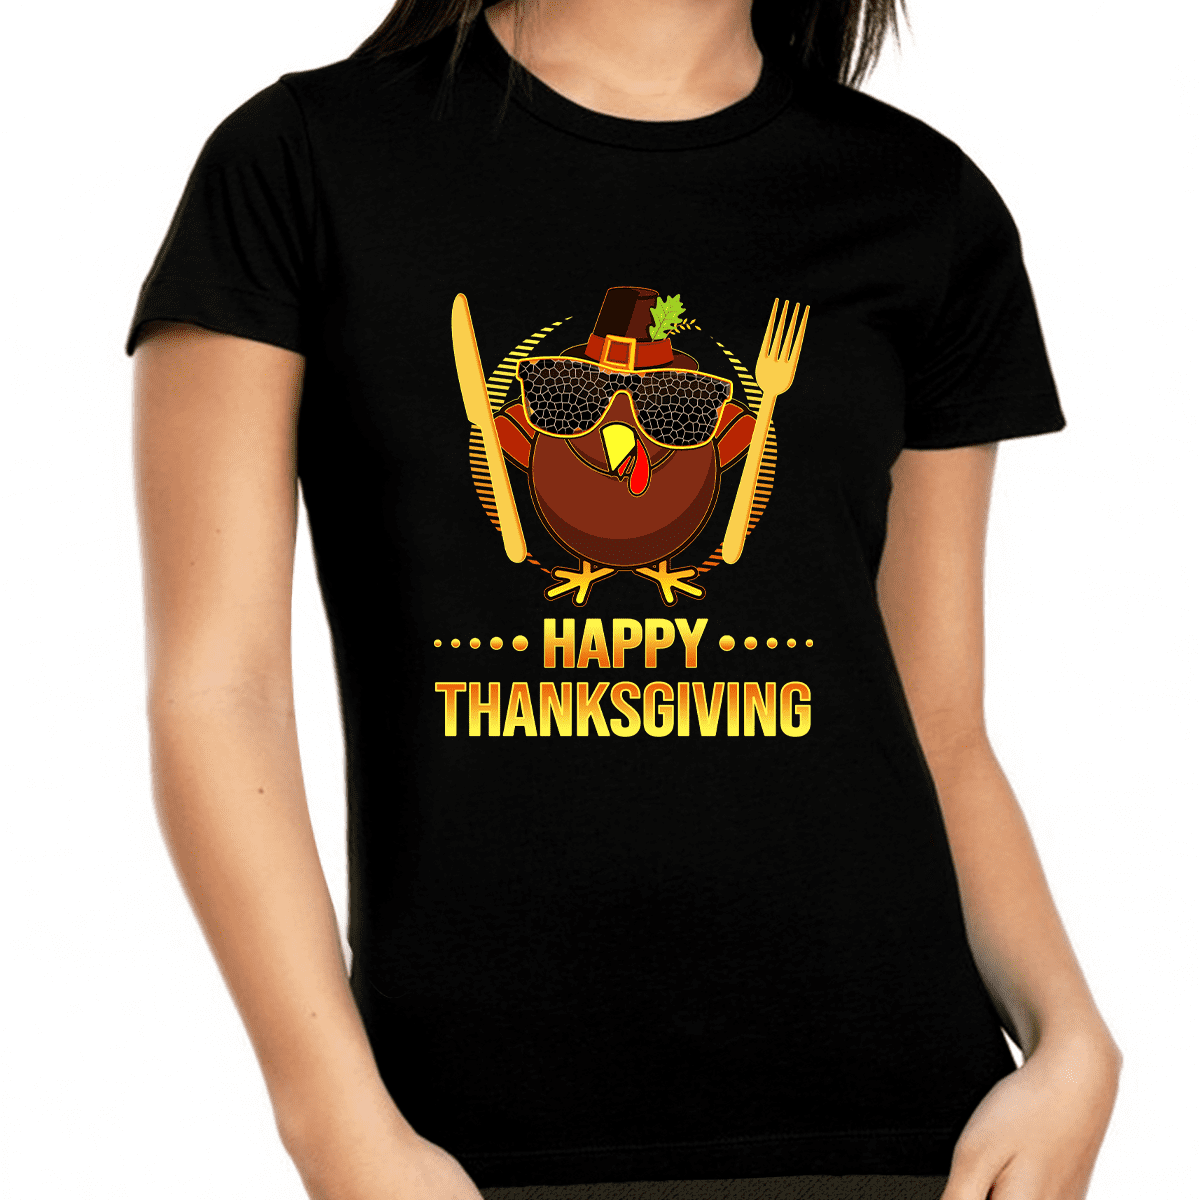 Funny Thanksgiving Shirts for Women ...